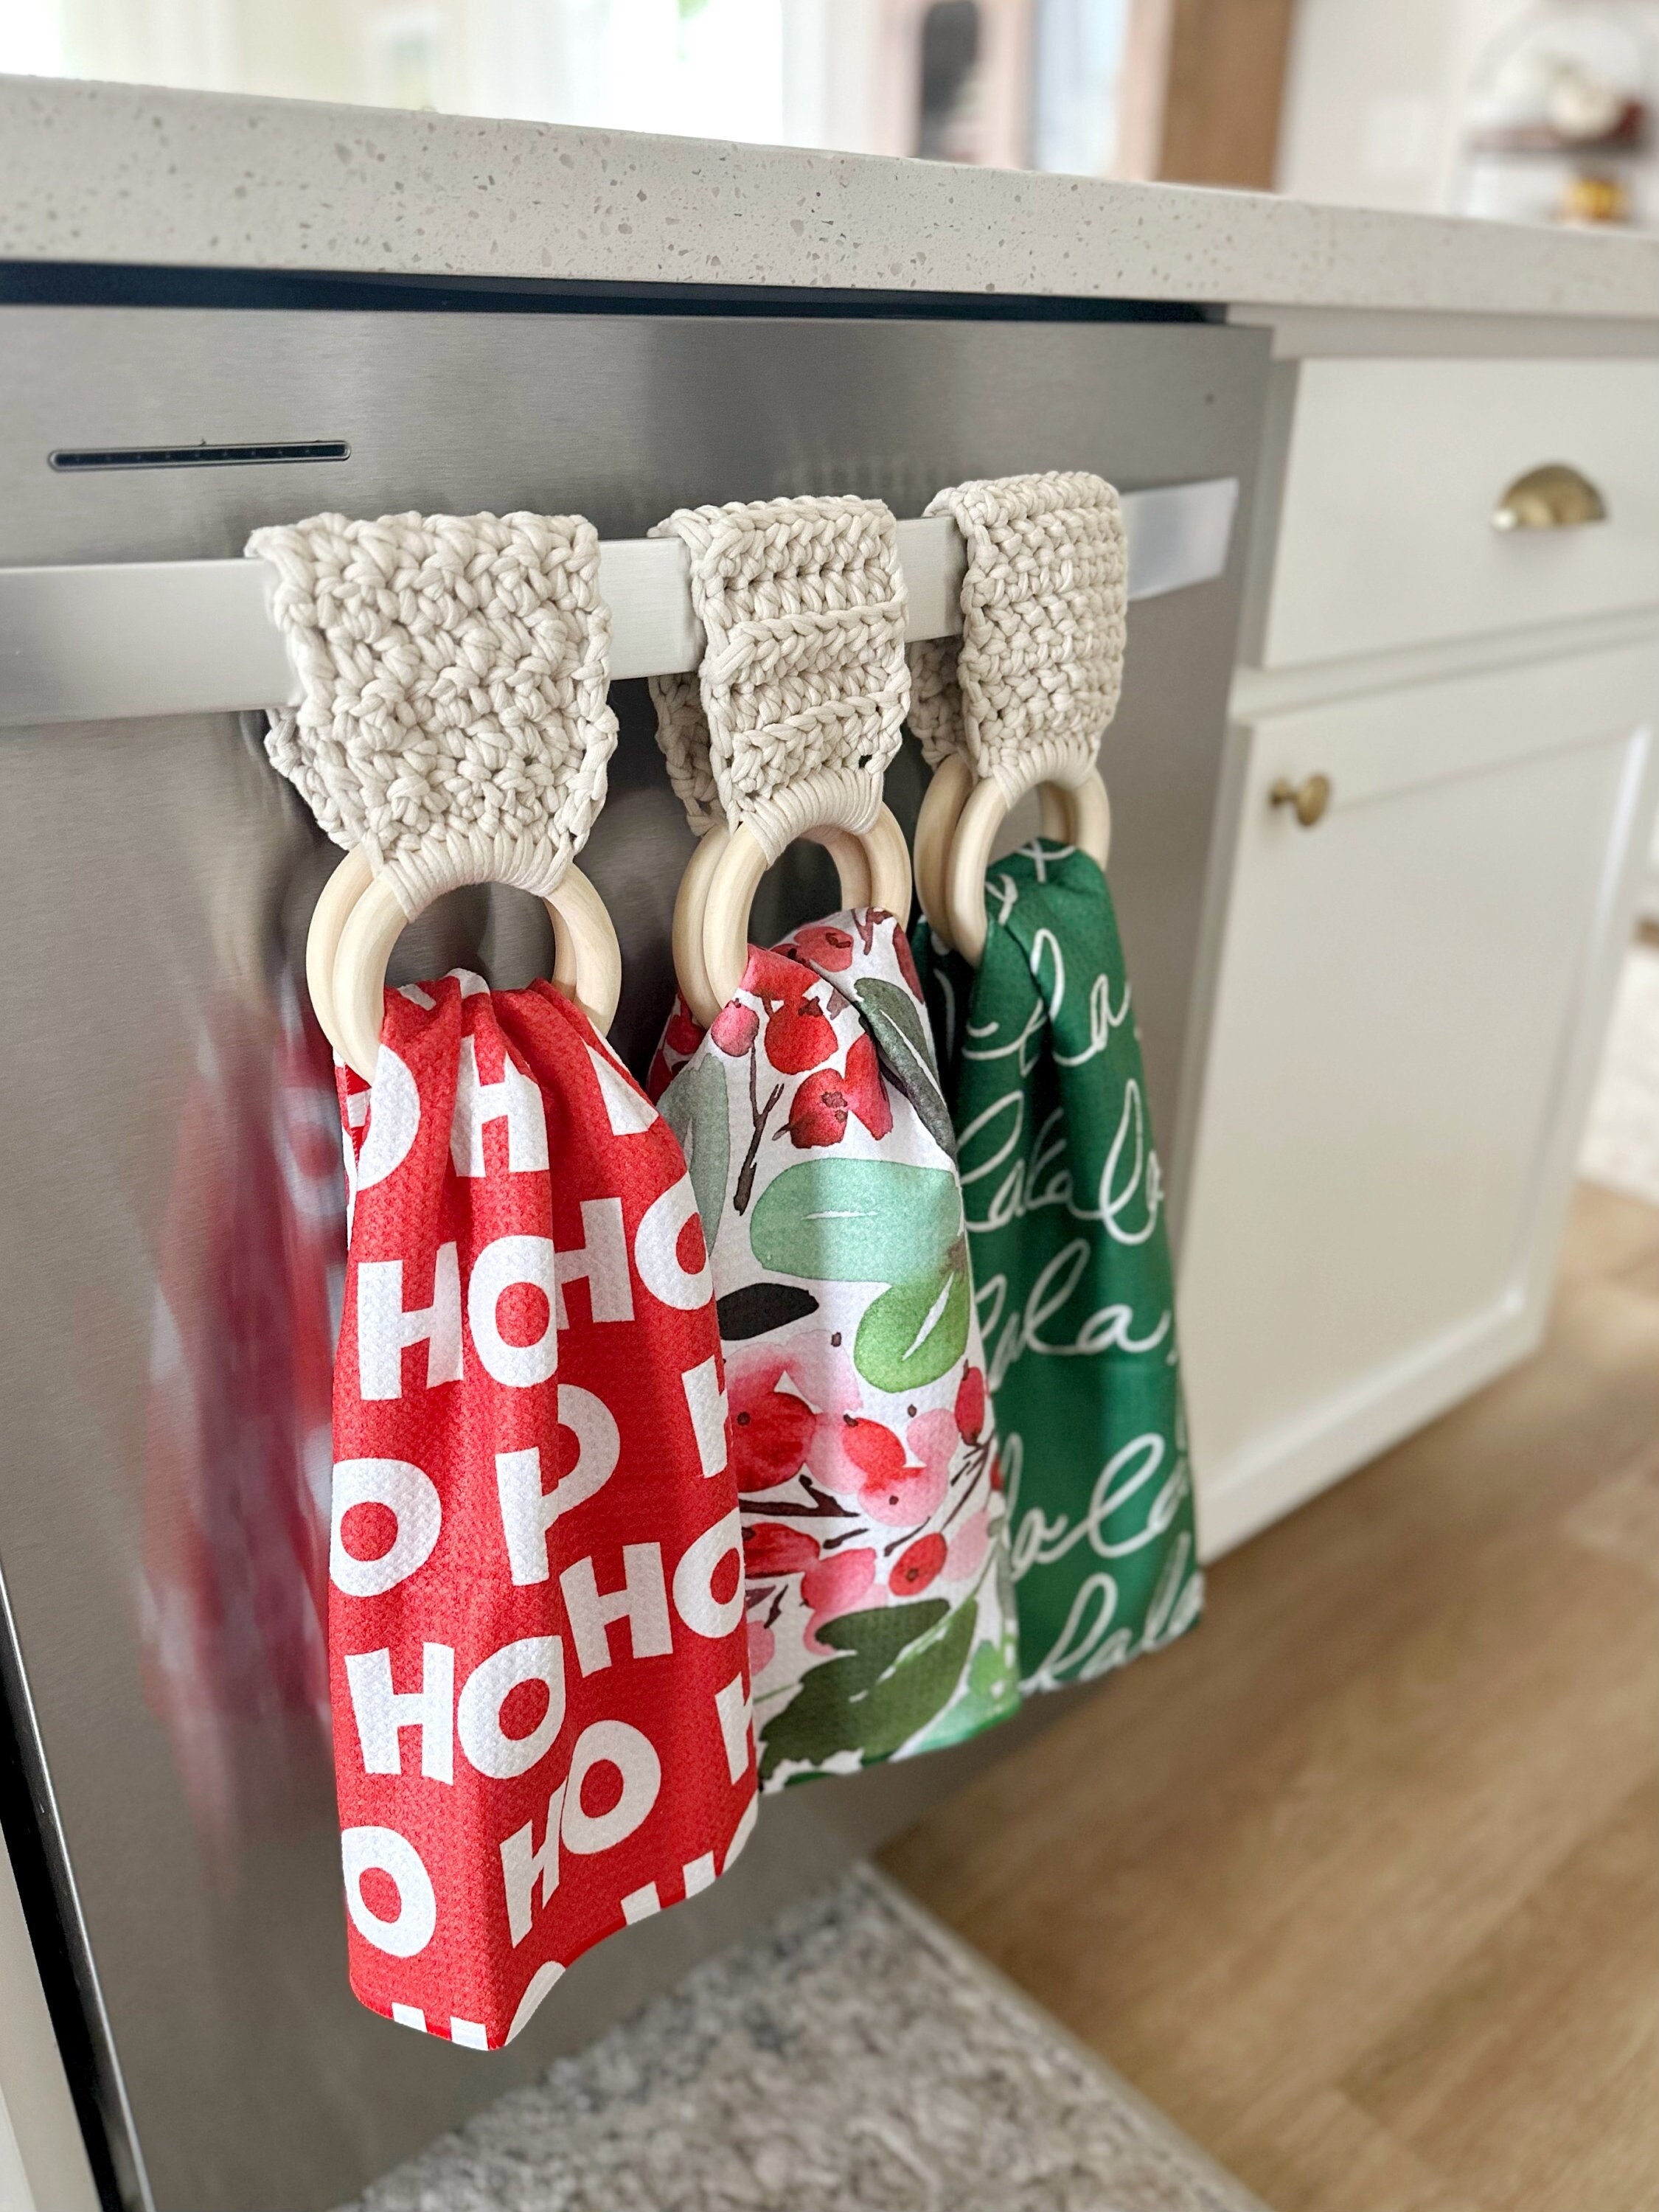 How to Make Hanging Kitchen Towels Story • Heather Handmade